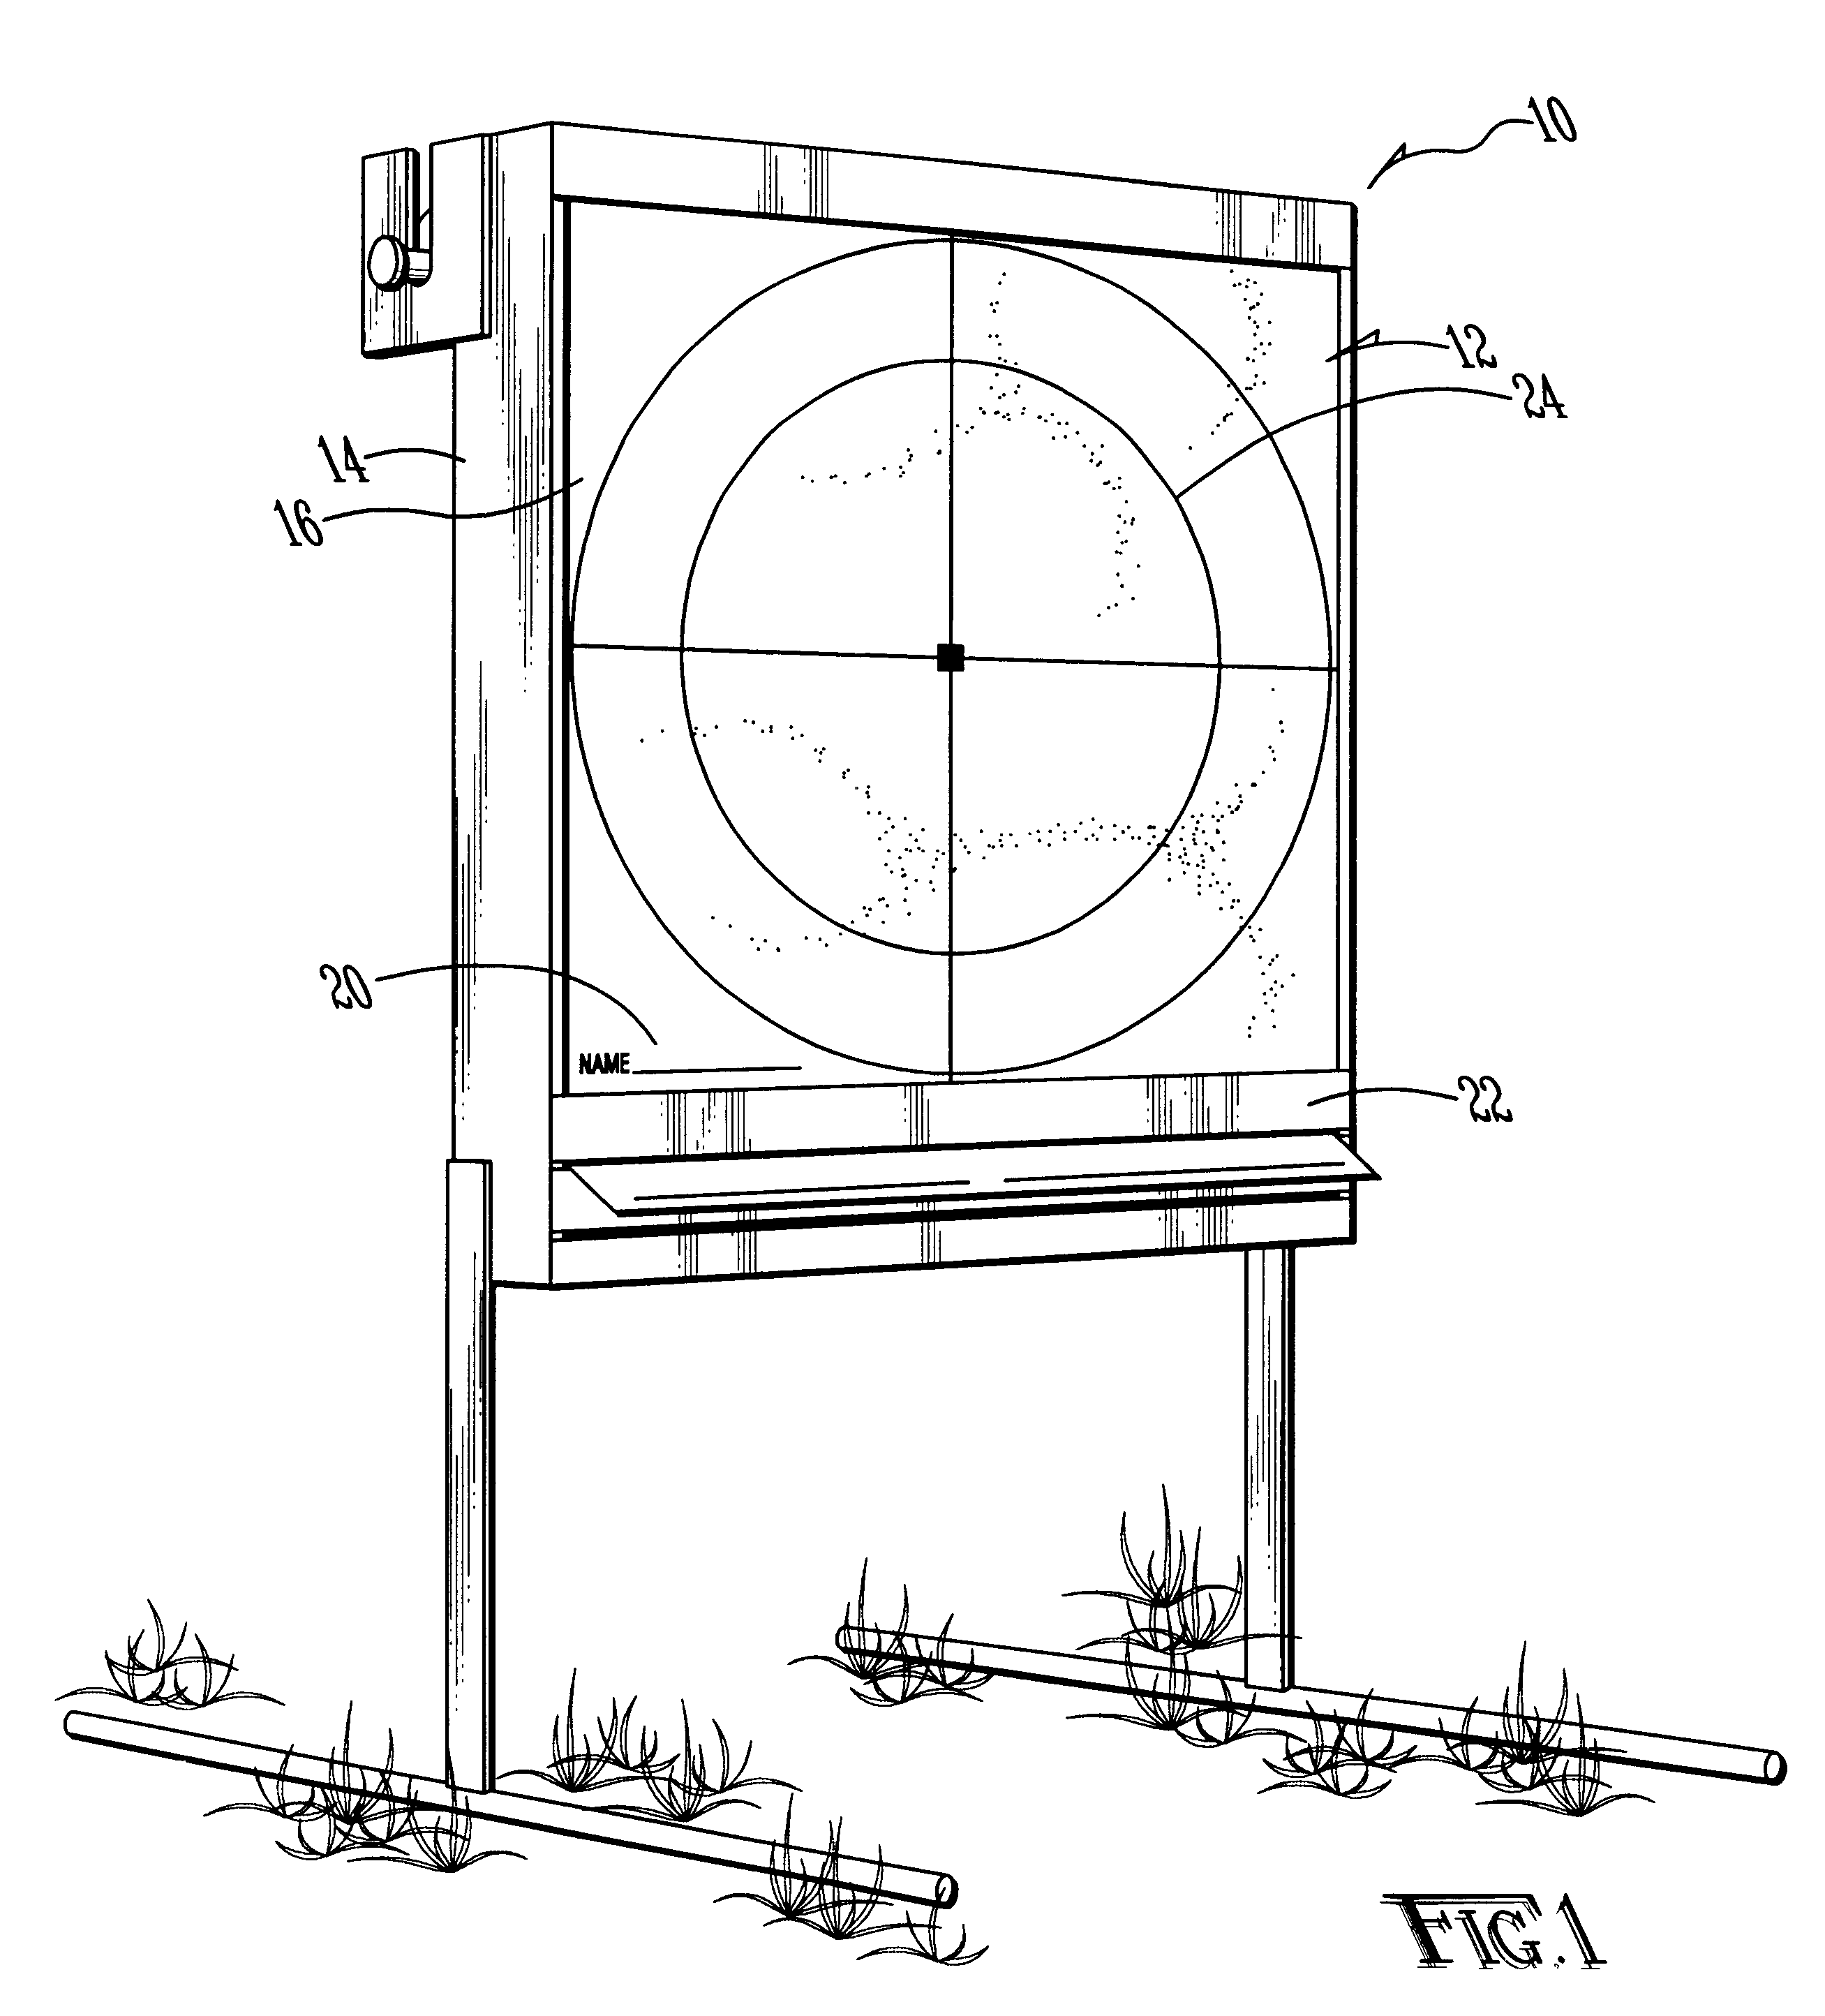 Paper roll target apparatus